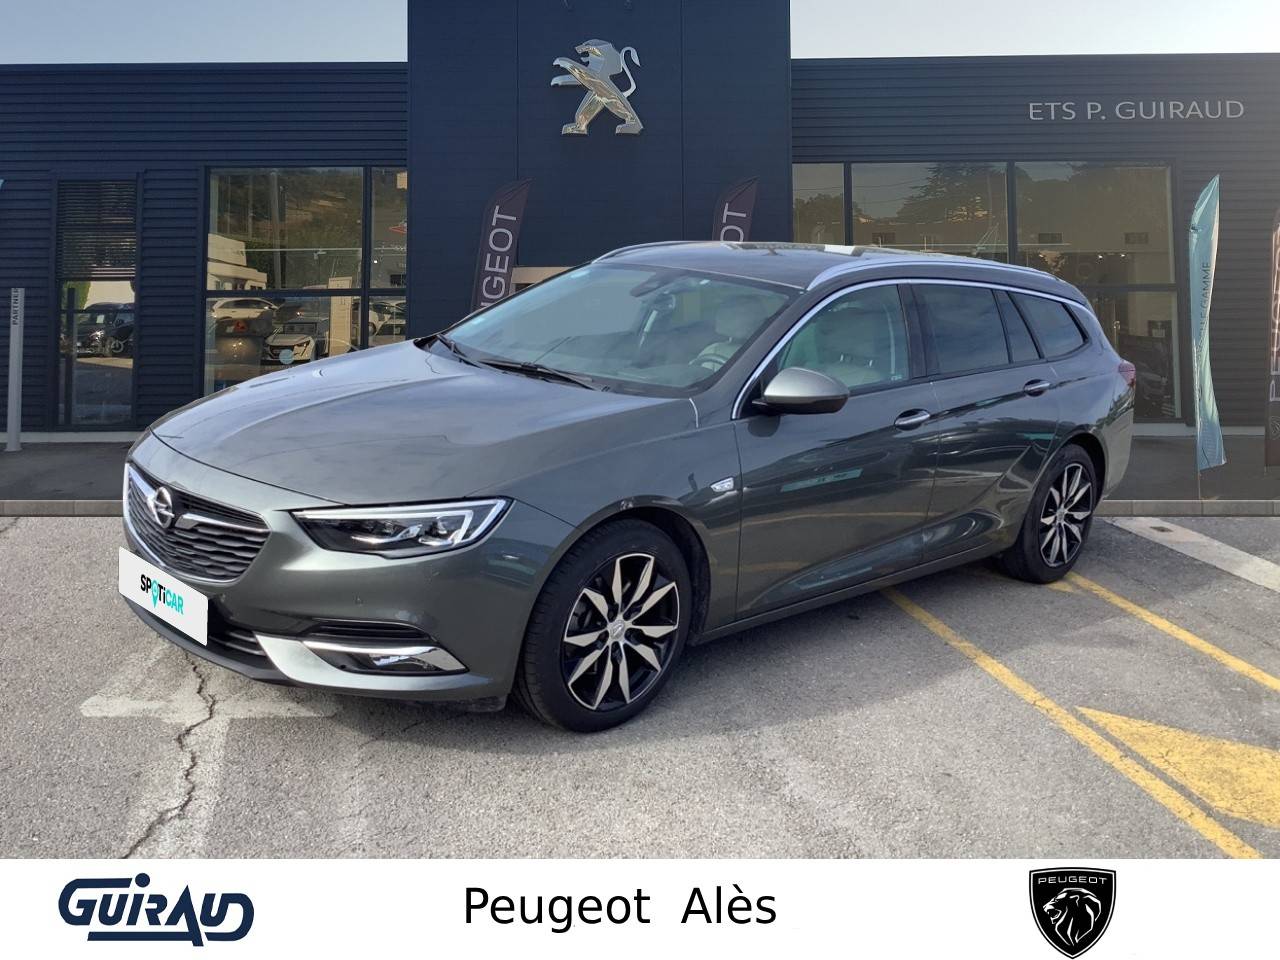 OPEL INSIGNIA | Insignia Sports Tourer 2.0 D 170 ch BlueInjection AT8 occasion - Peugeot Alès